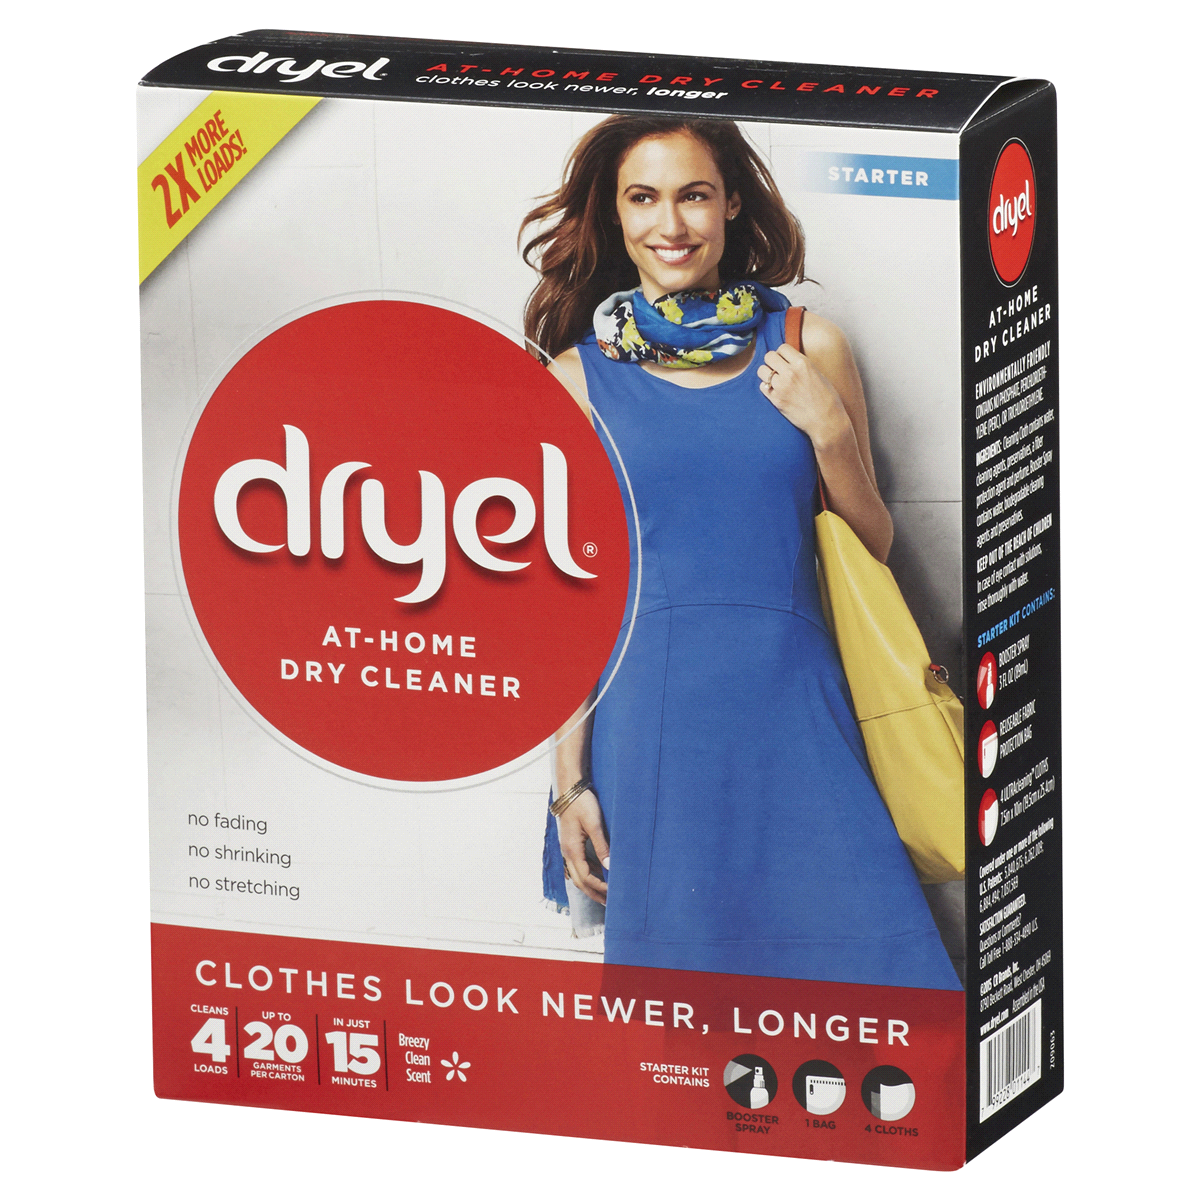 dryel at-Home Dry Cleaner Refill Kit - 8 Nepal | Ubuy